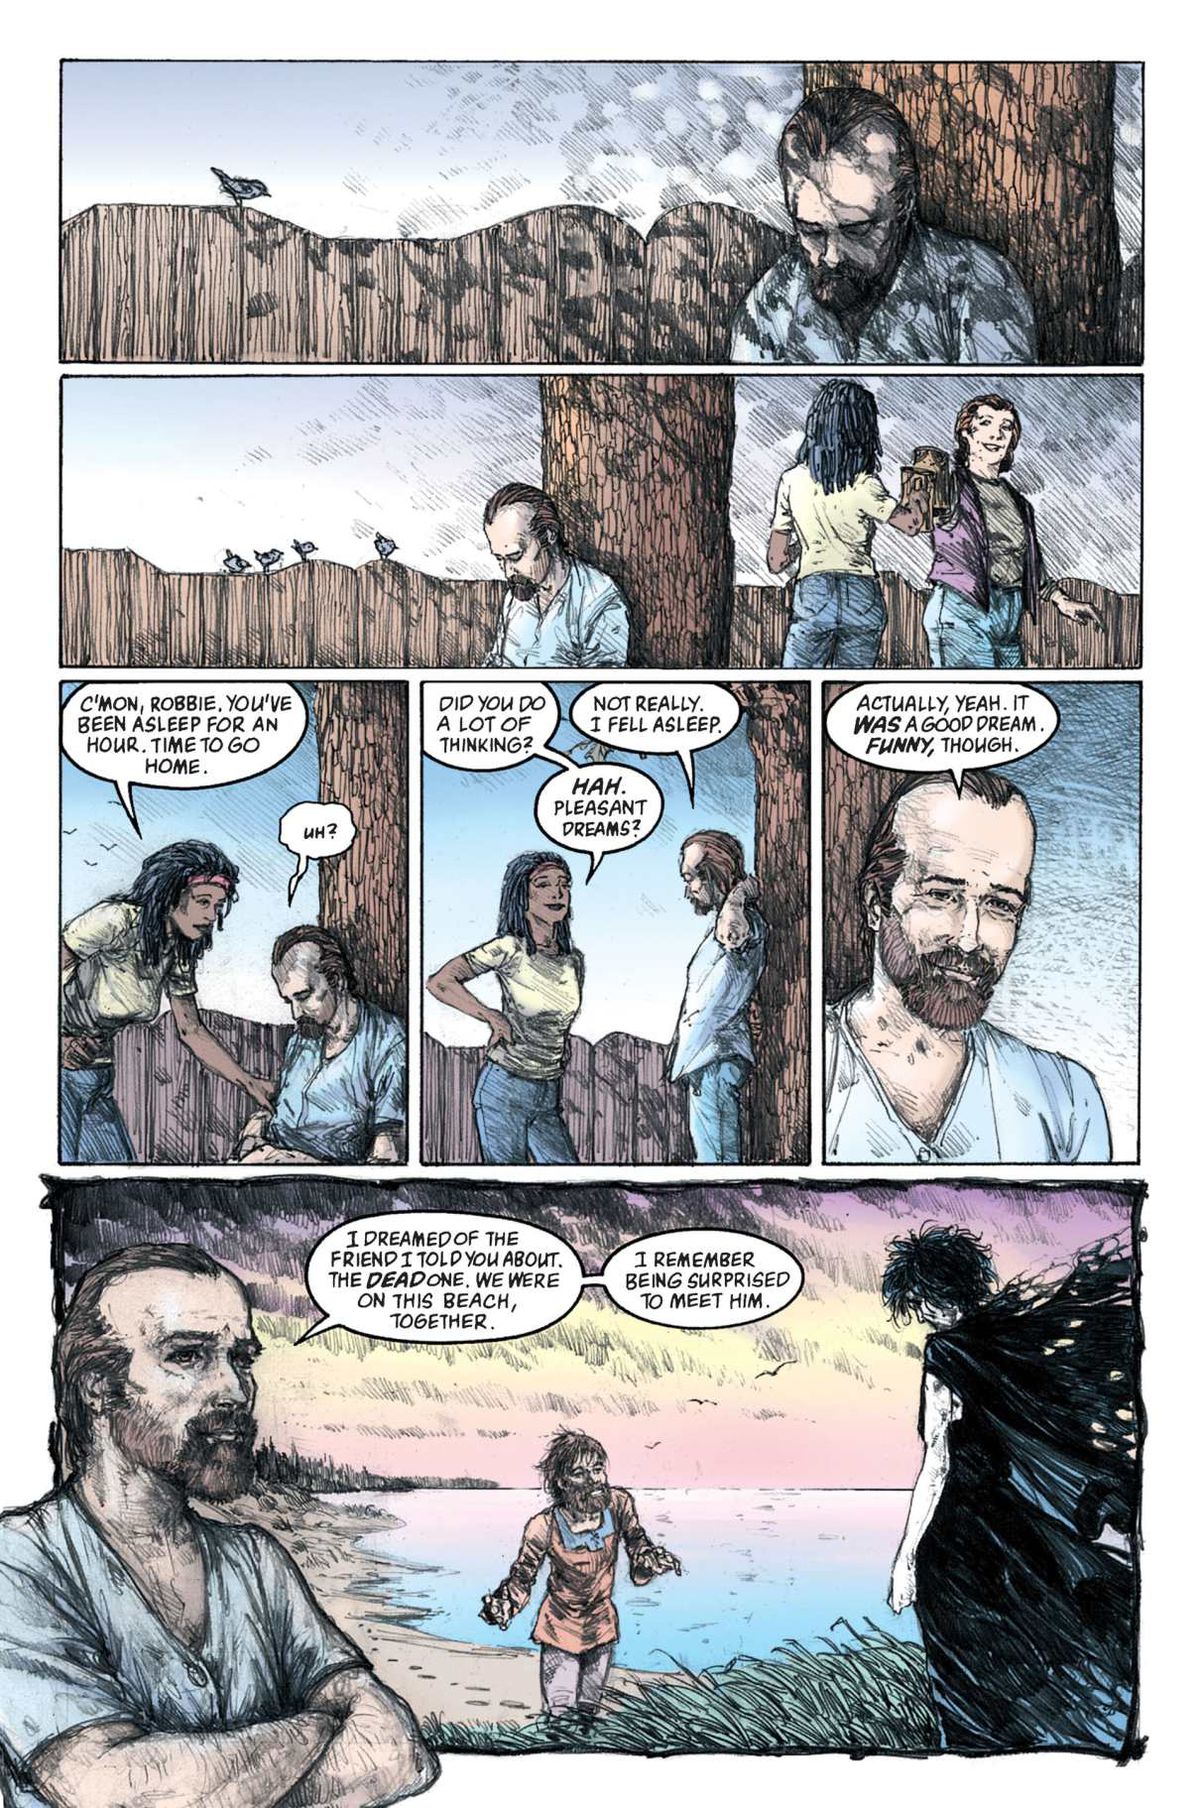 A page from issue #73, “An Epilogue, Sunday Mourning,” from The Sandman.